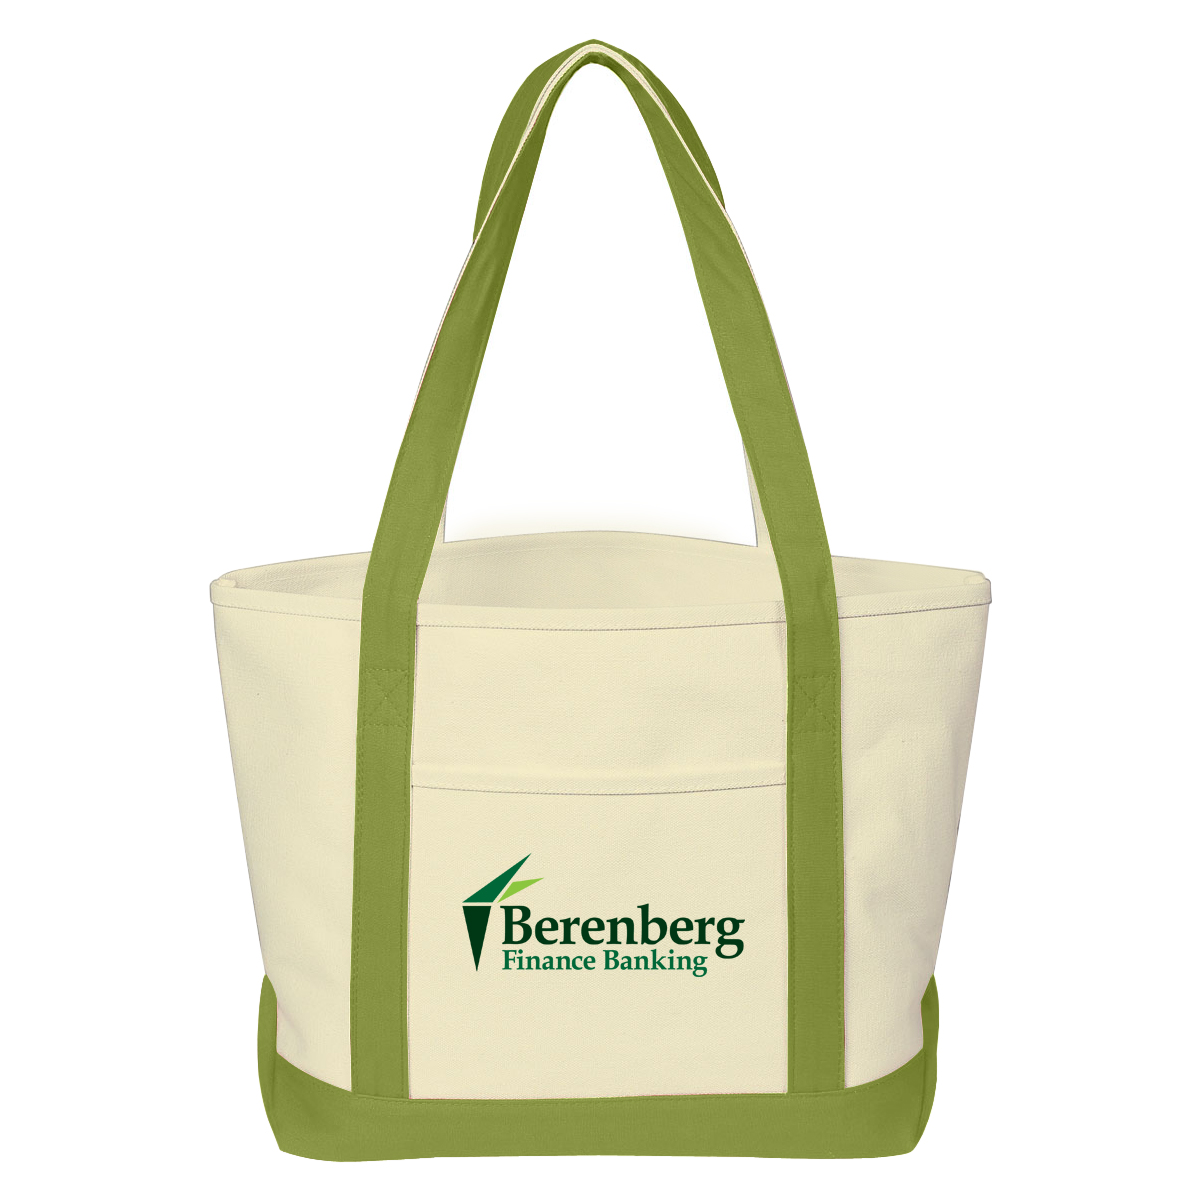 #3230 Medium Starboard Cotton Canvas Tote Bag - Hit Promotional Products